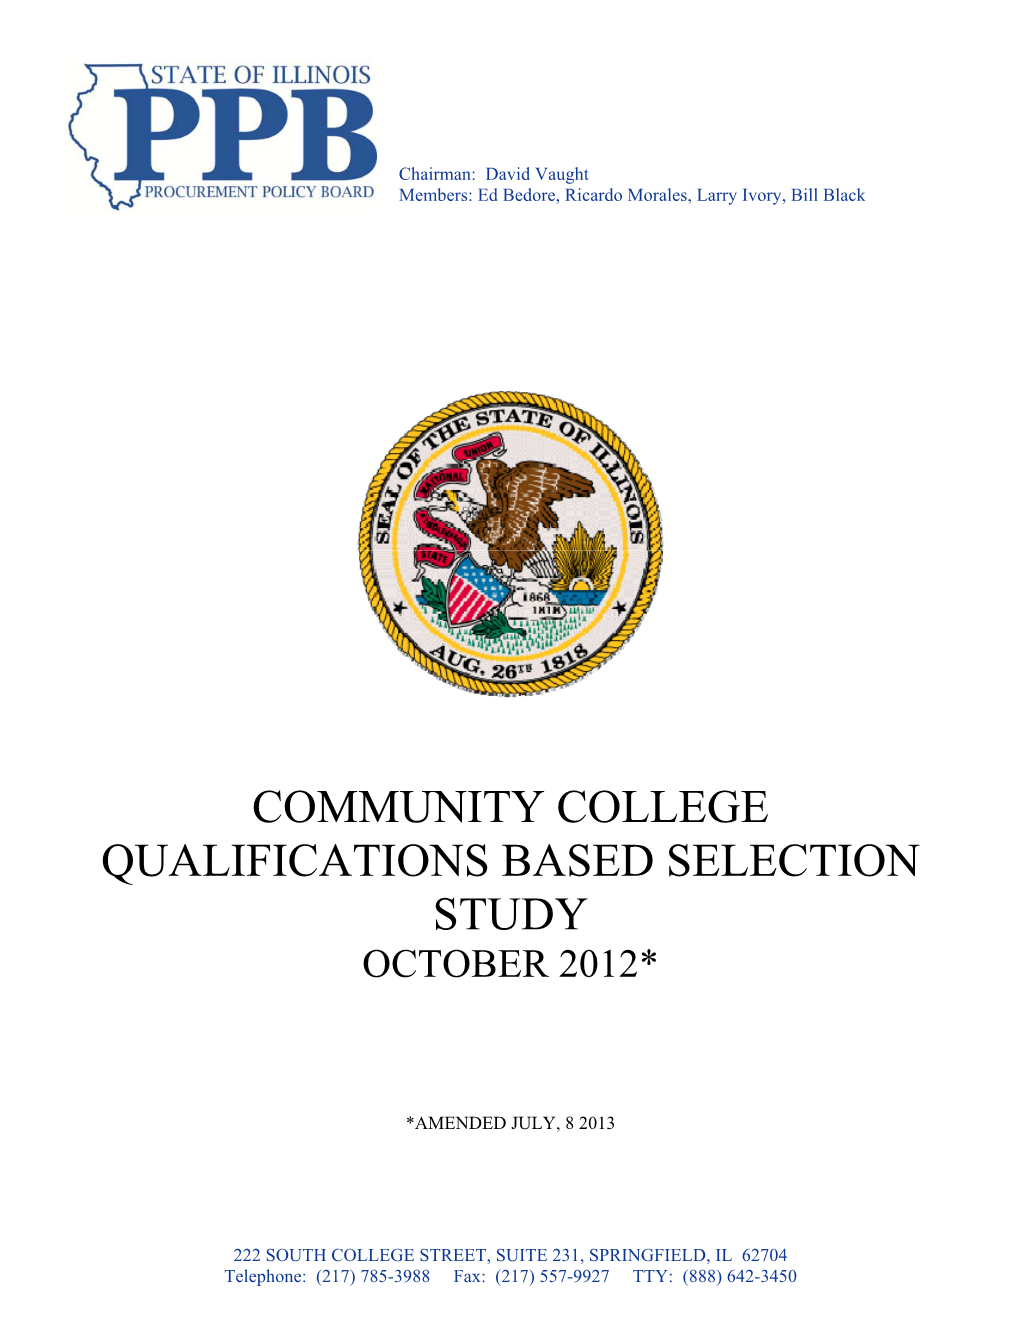 Community College Qualifications Based Selection Study October 2012*